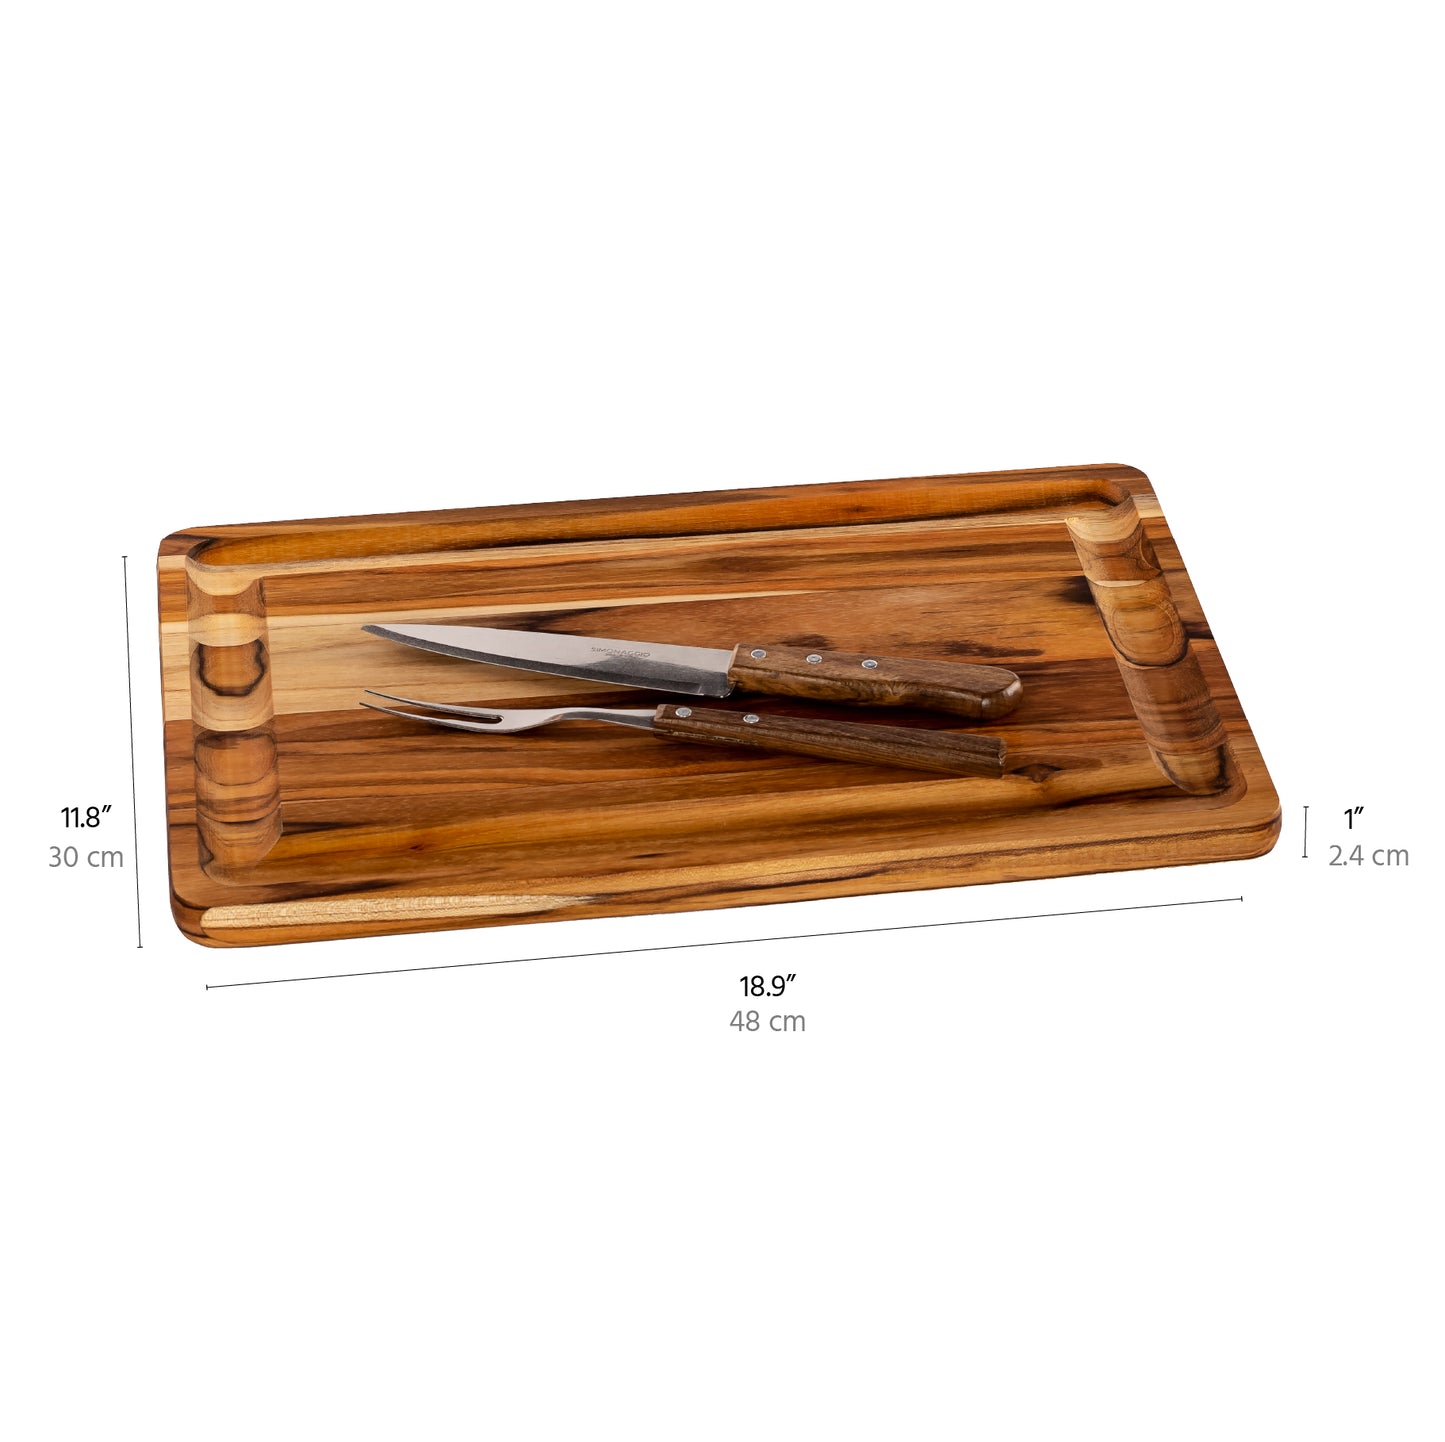 meistar Large End Grain Teak Wood Cutting Board. Thick Butcher Block for Kitchen, Brisket and BBQ with Stainless Steel Tray and Juice Groove